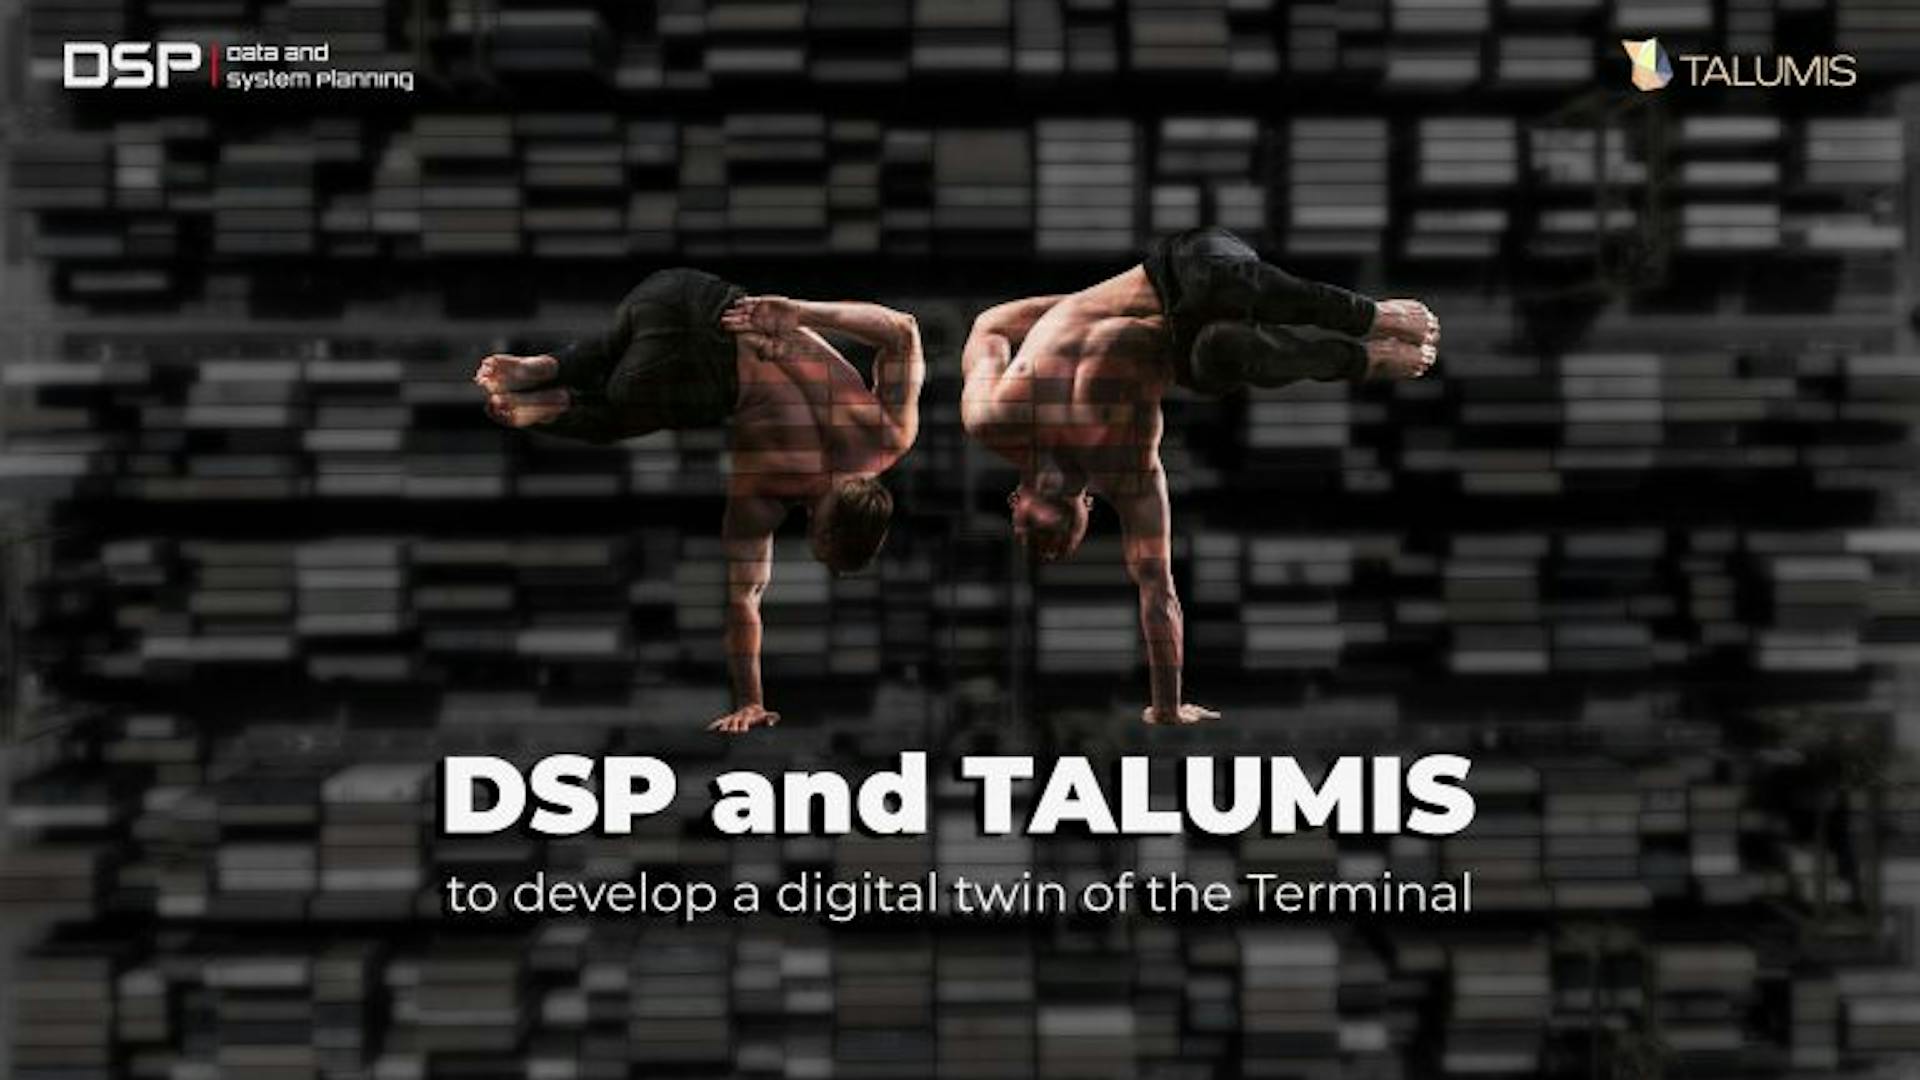 DSP and TALUMIS together to develop a Digital Twin of the Terminal